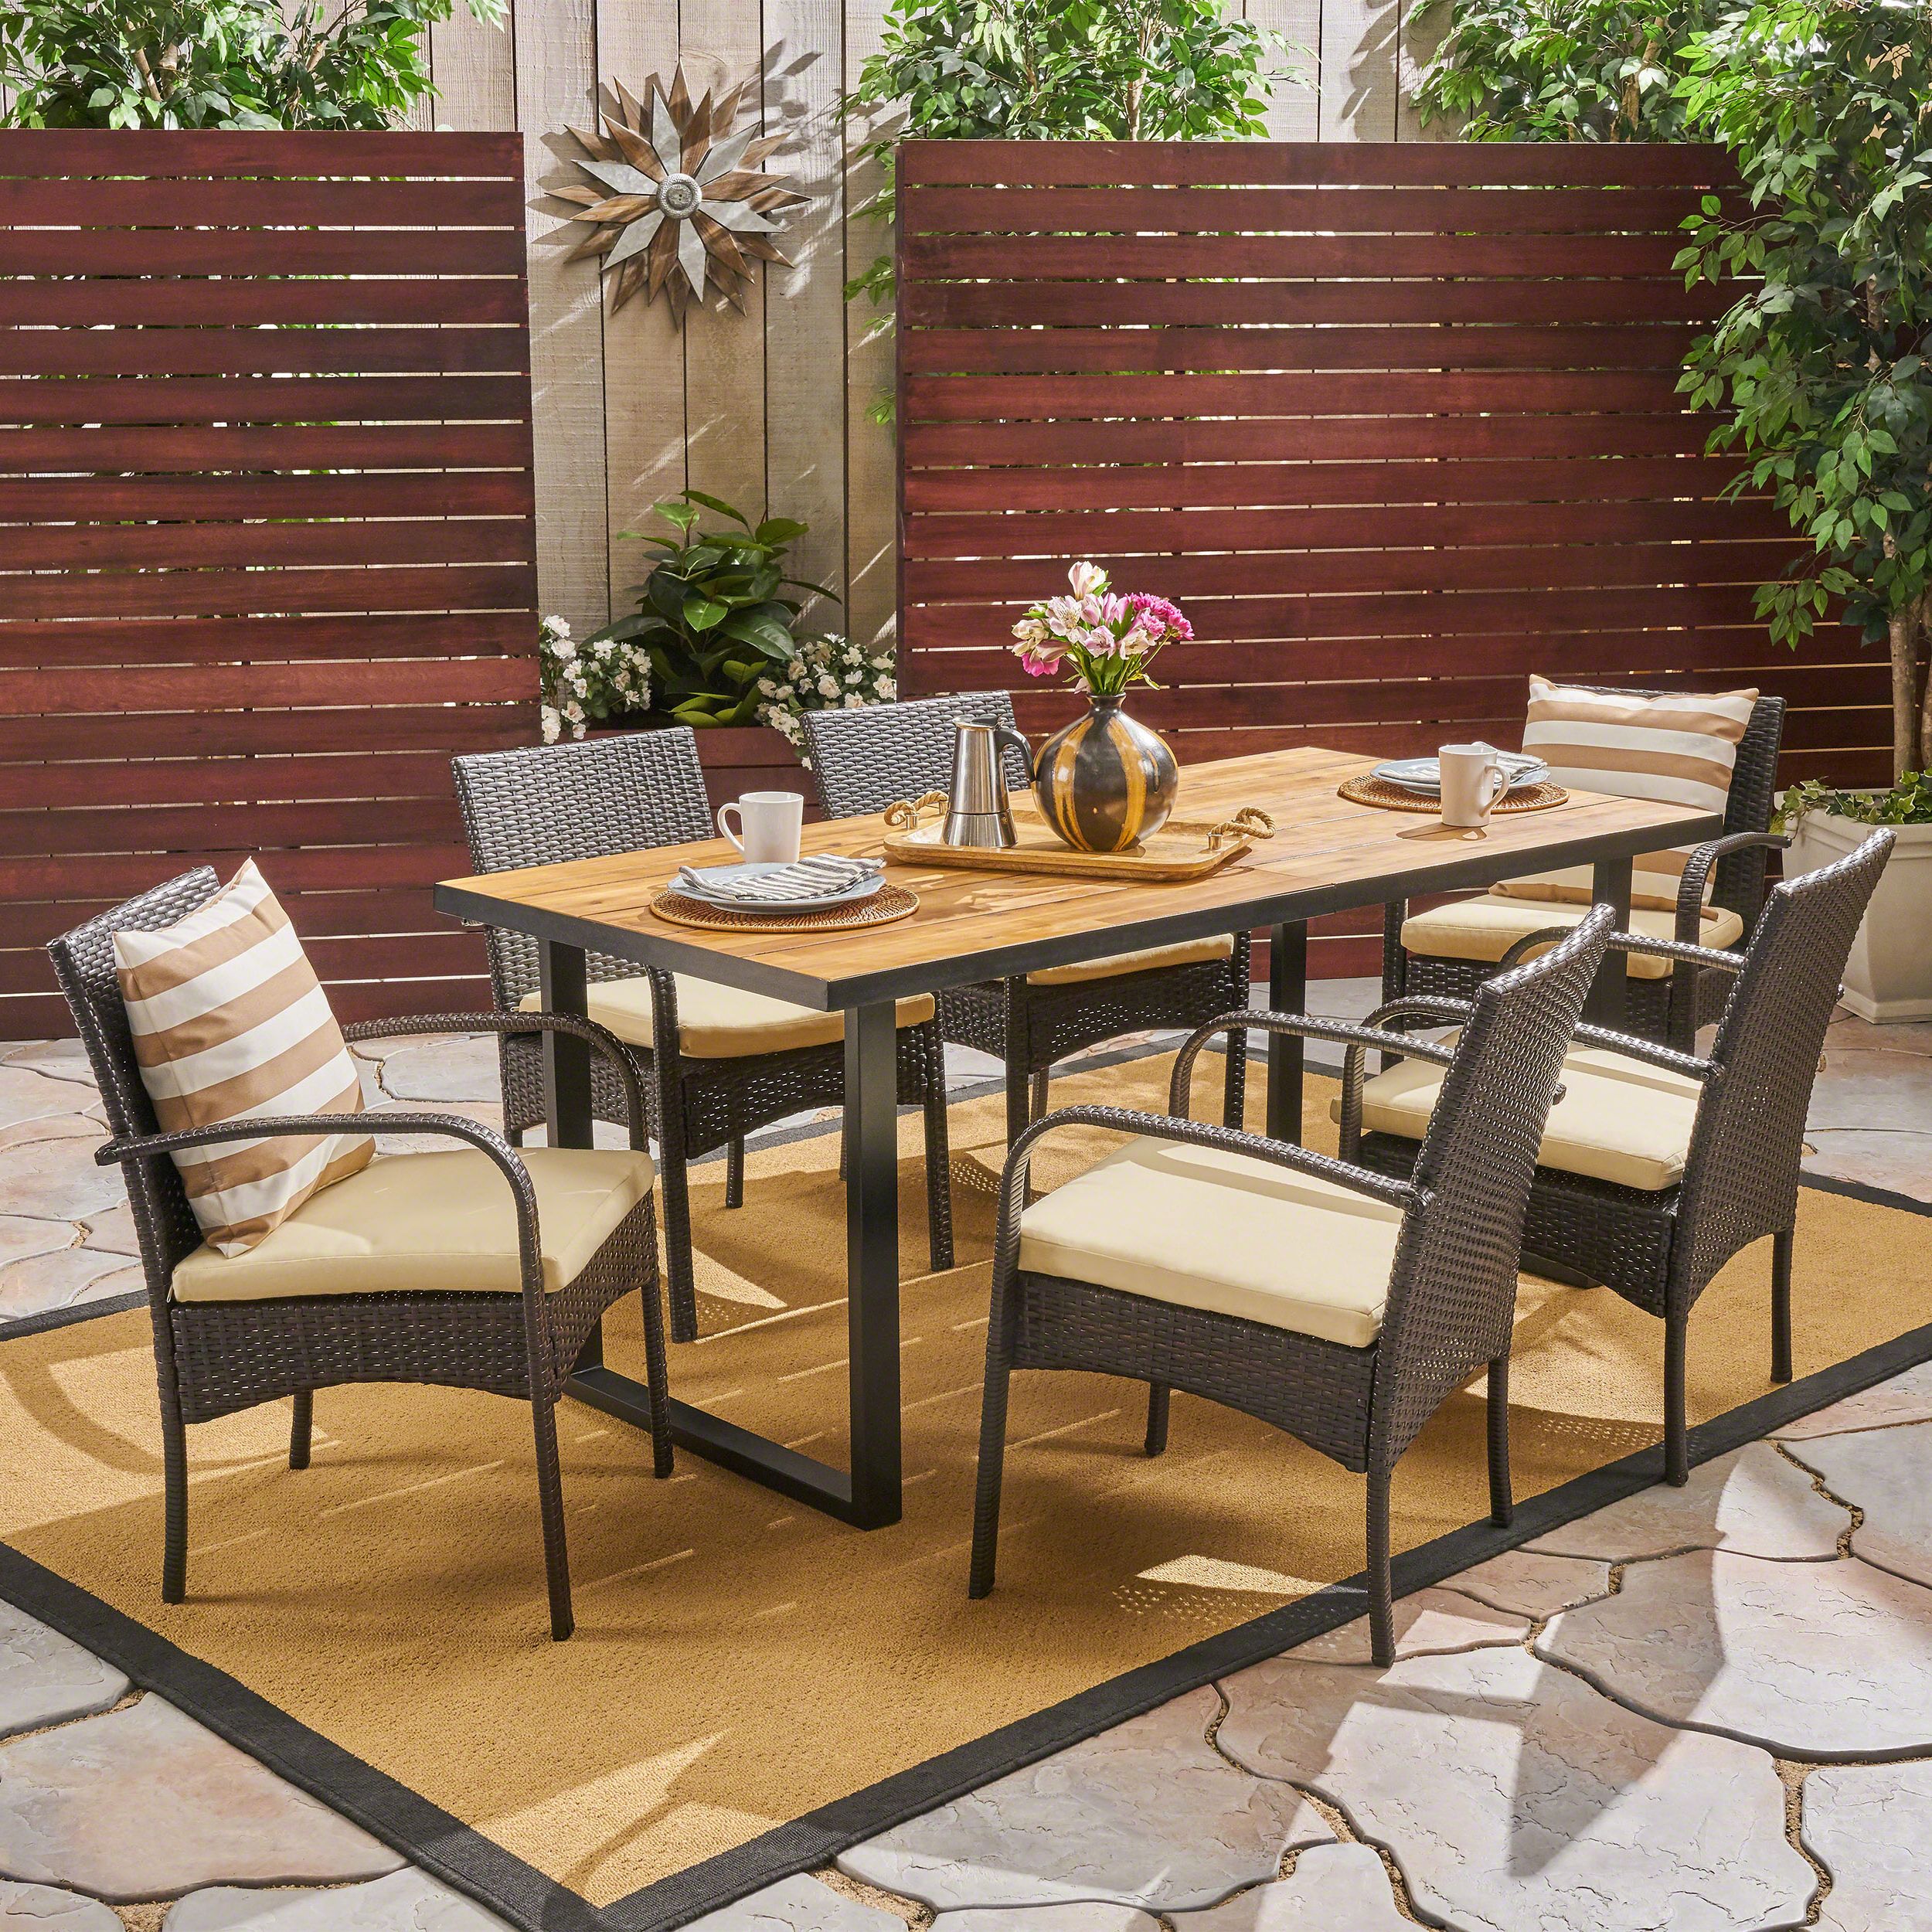 Juliet Outdoor 7 Piece Acacia Wood And Wicker Rectangular Dining Set Throughout Most Up To Date Teak And Wicker Dining Sets (View 3 of 15)